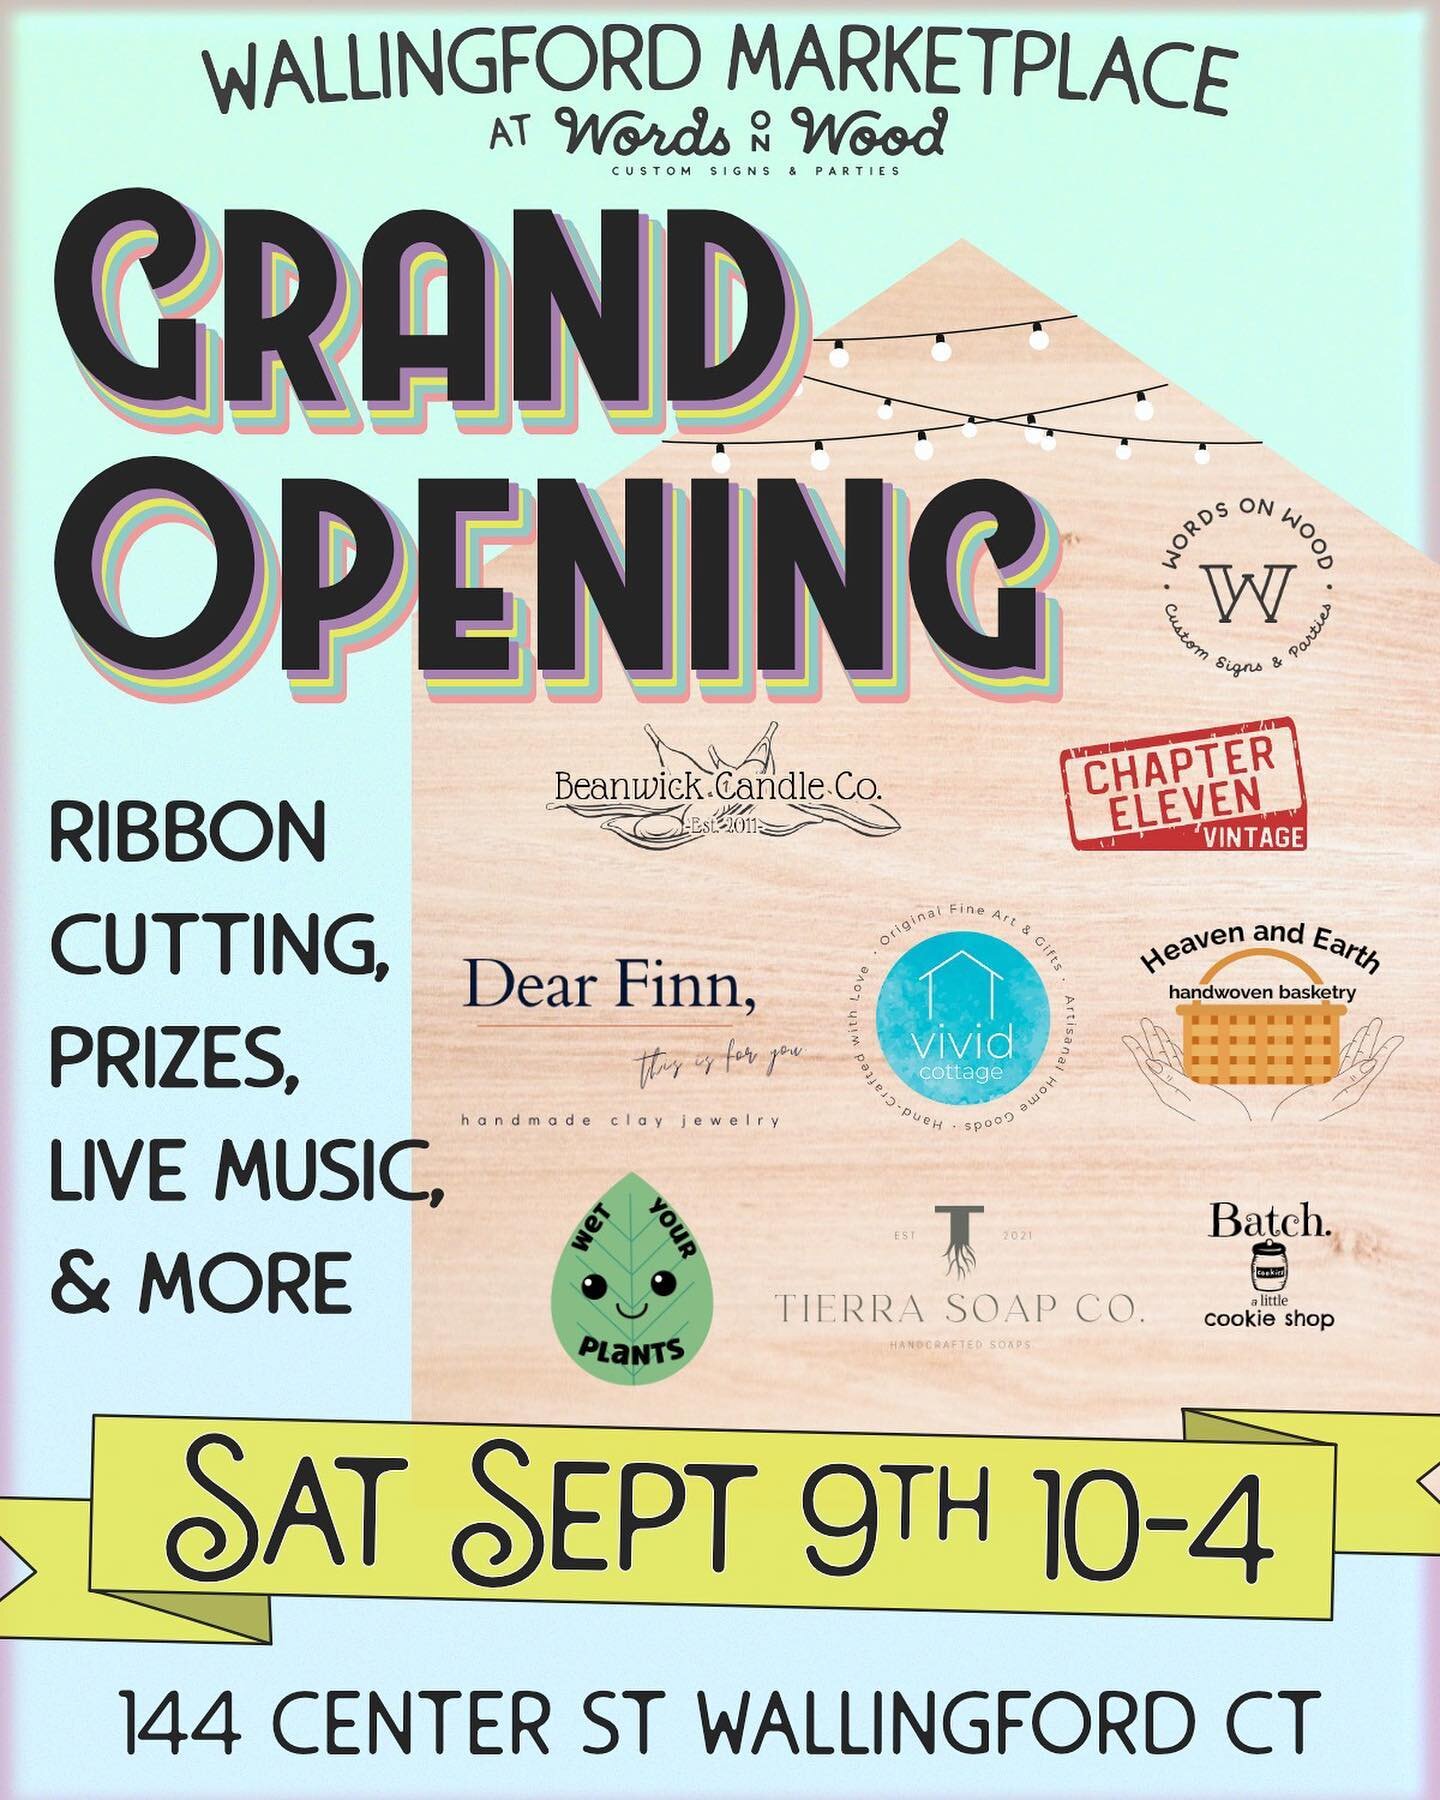 📣 We are getting closer to the @wallingfordmarketplace grand opening! Will we see you there!? 

Shops:
@beanwick 
@dearfinnboutique 
@chapter11vintage 
@hevenearth 
@vividcottage 
@tierrasoapco 
@wetyourplantsct 
@batch.ct